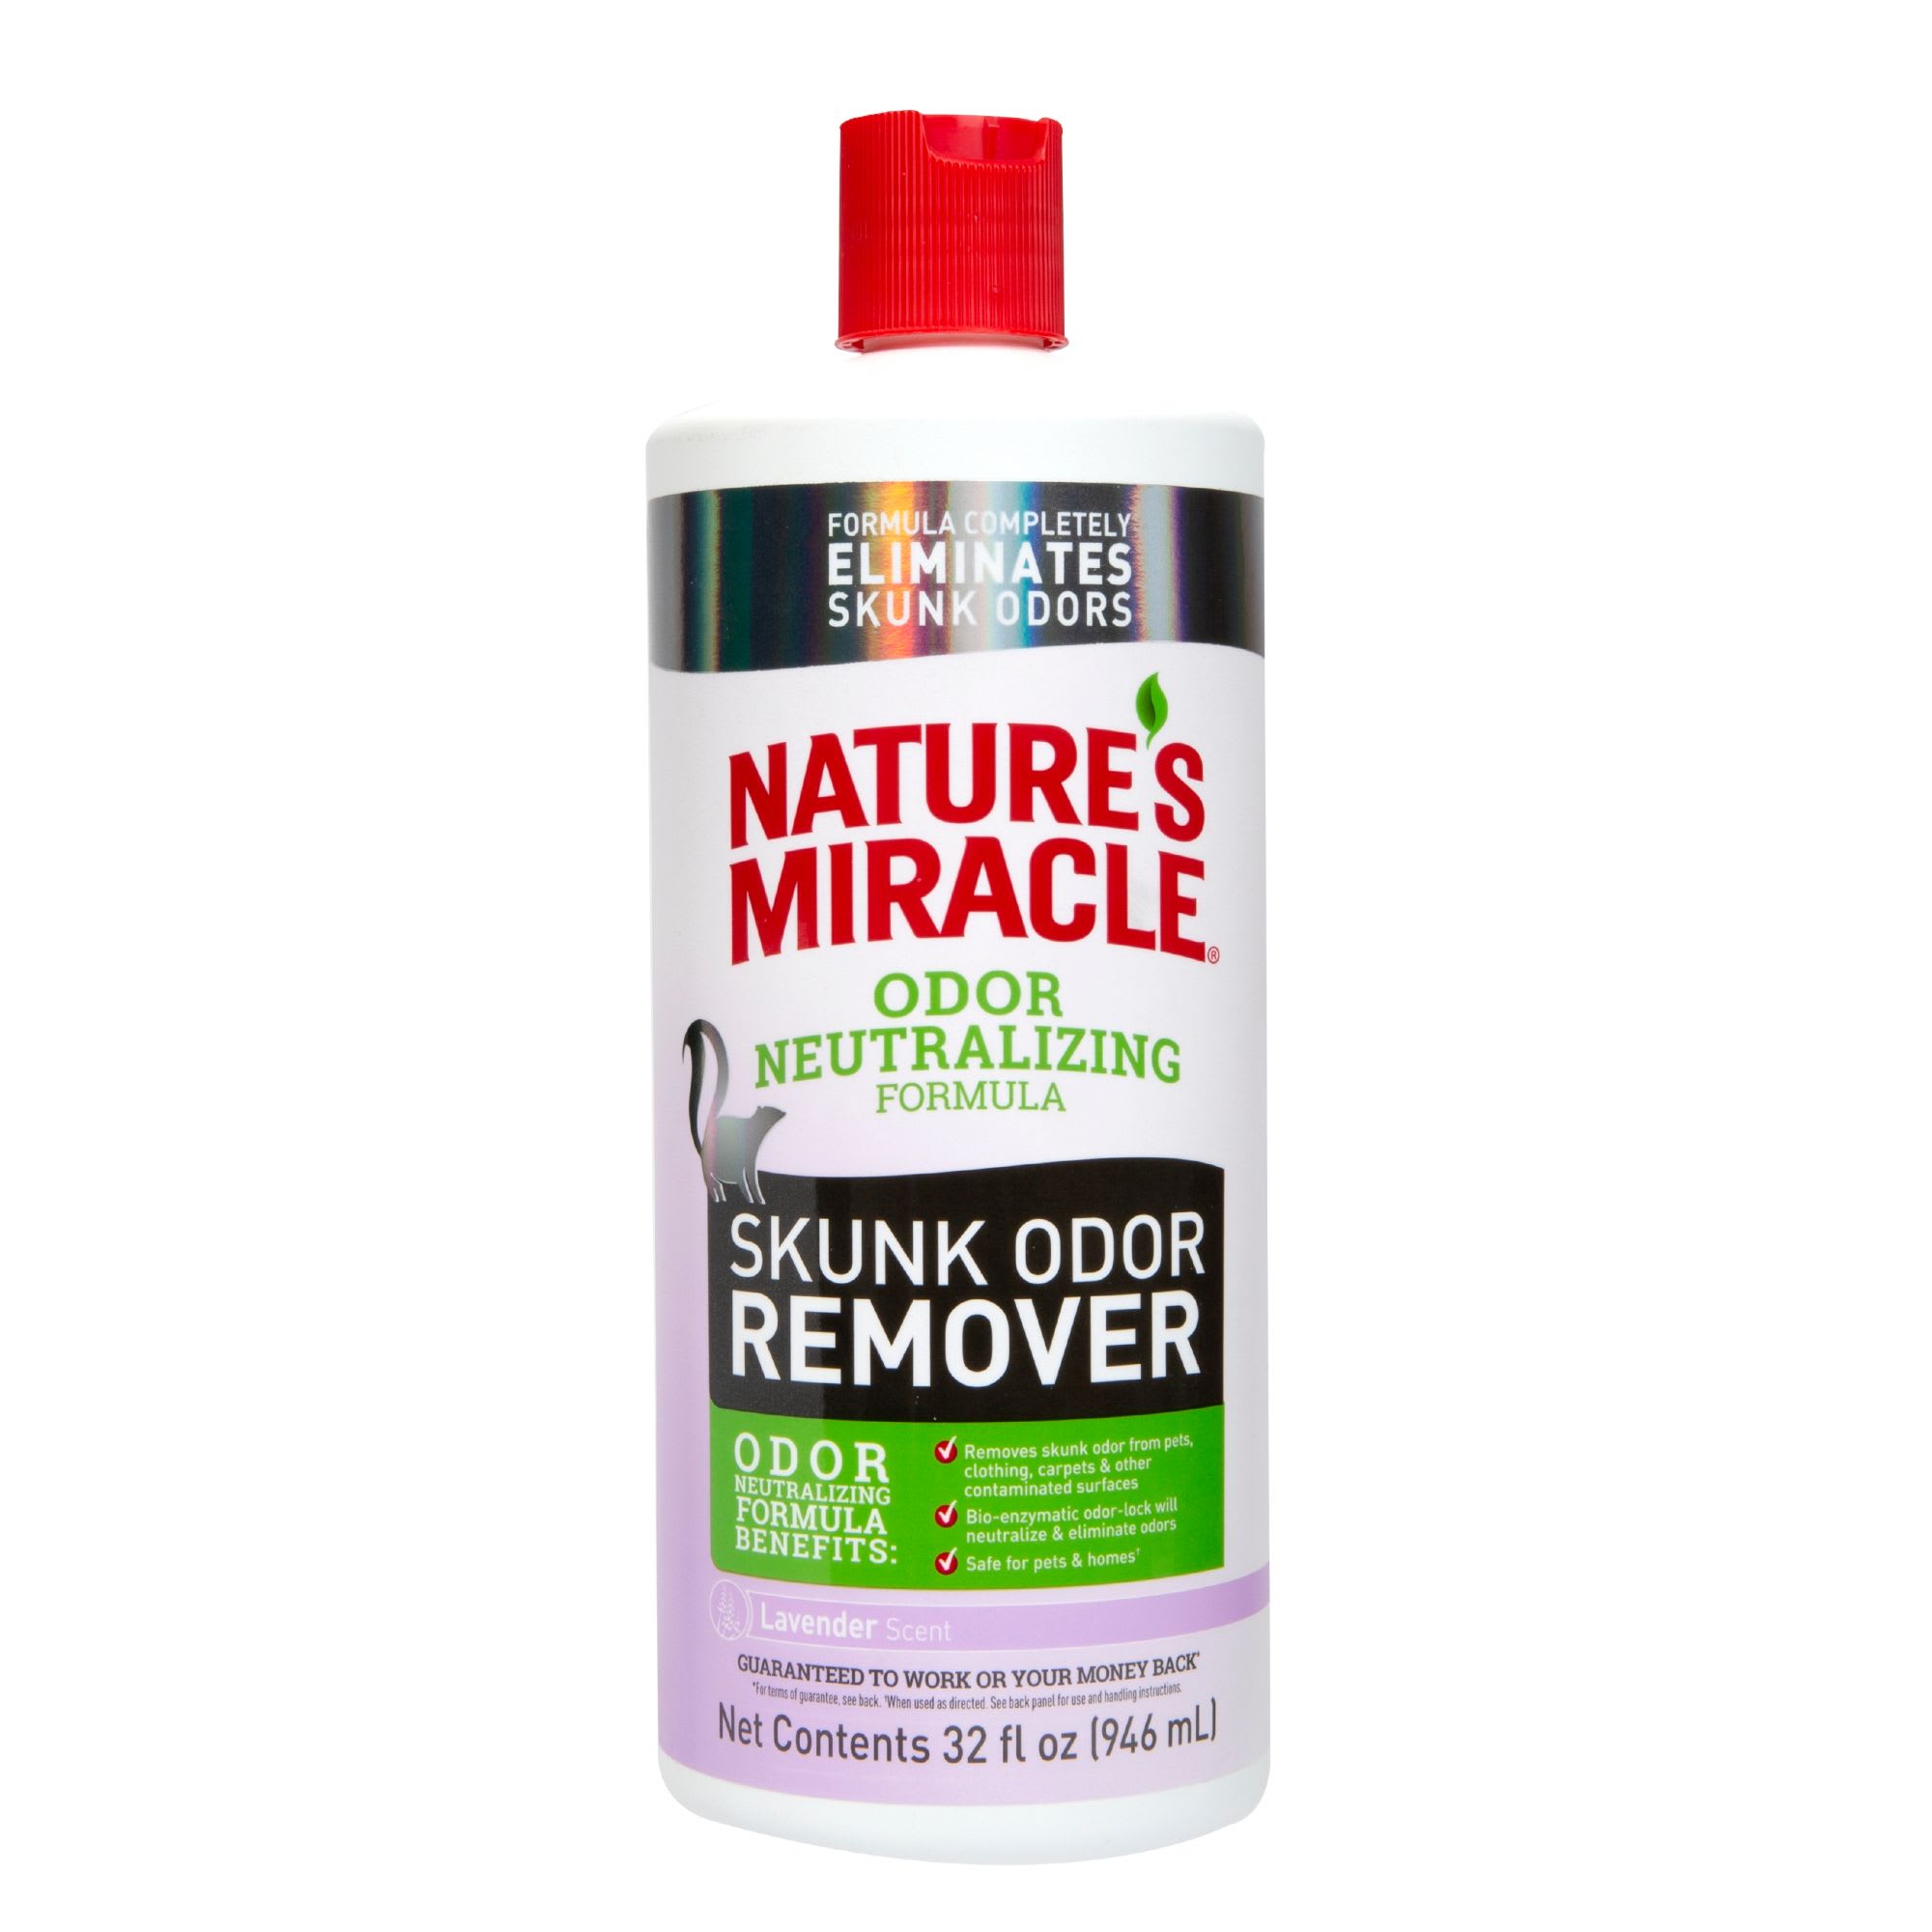 nature's miracle skunk odor remover